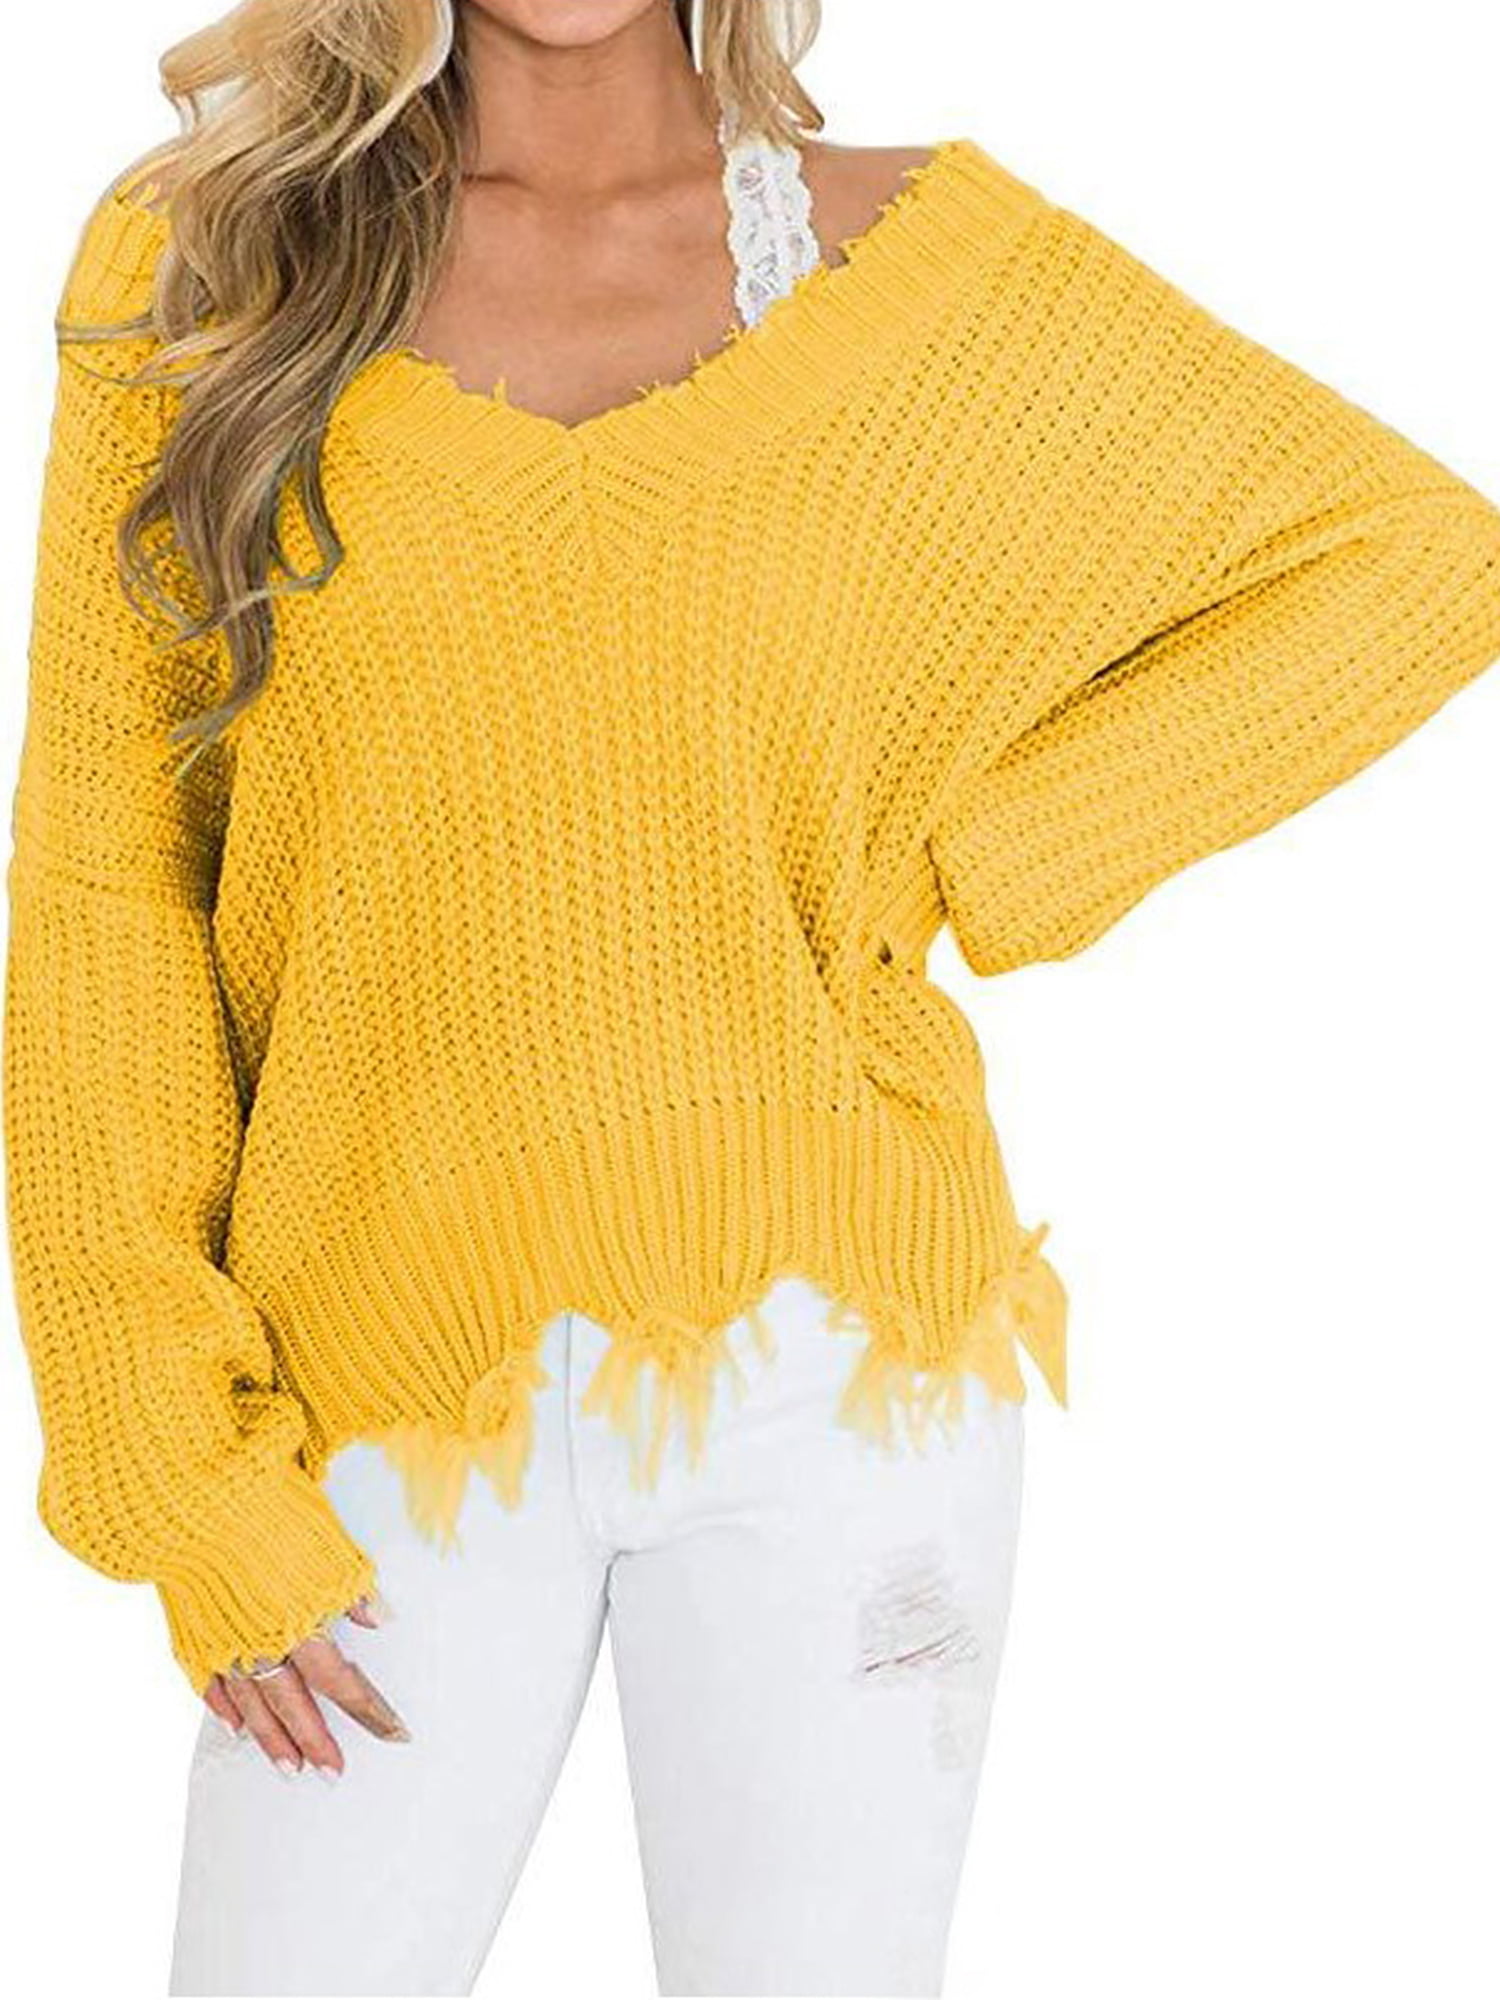 Sweater Tops Long Sleeve T-Shirt Knitwear Loose Knitted Pullover Jumper Womens